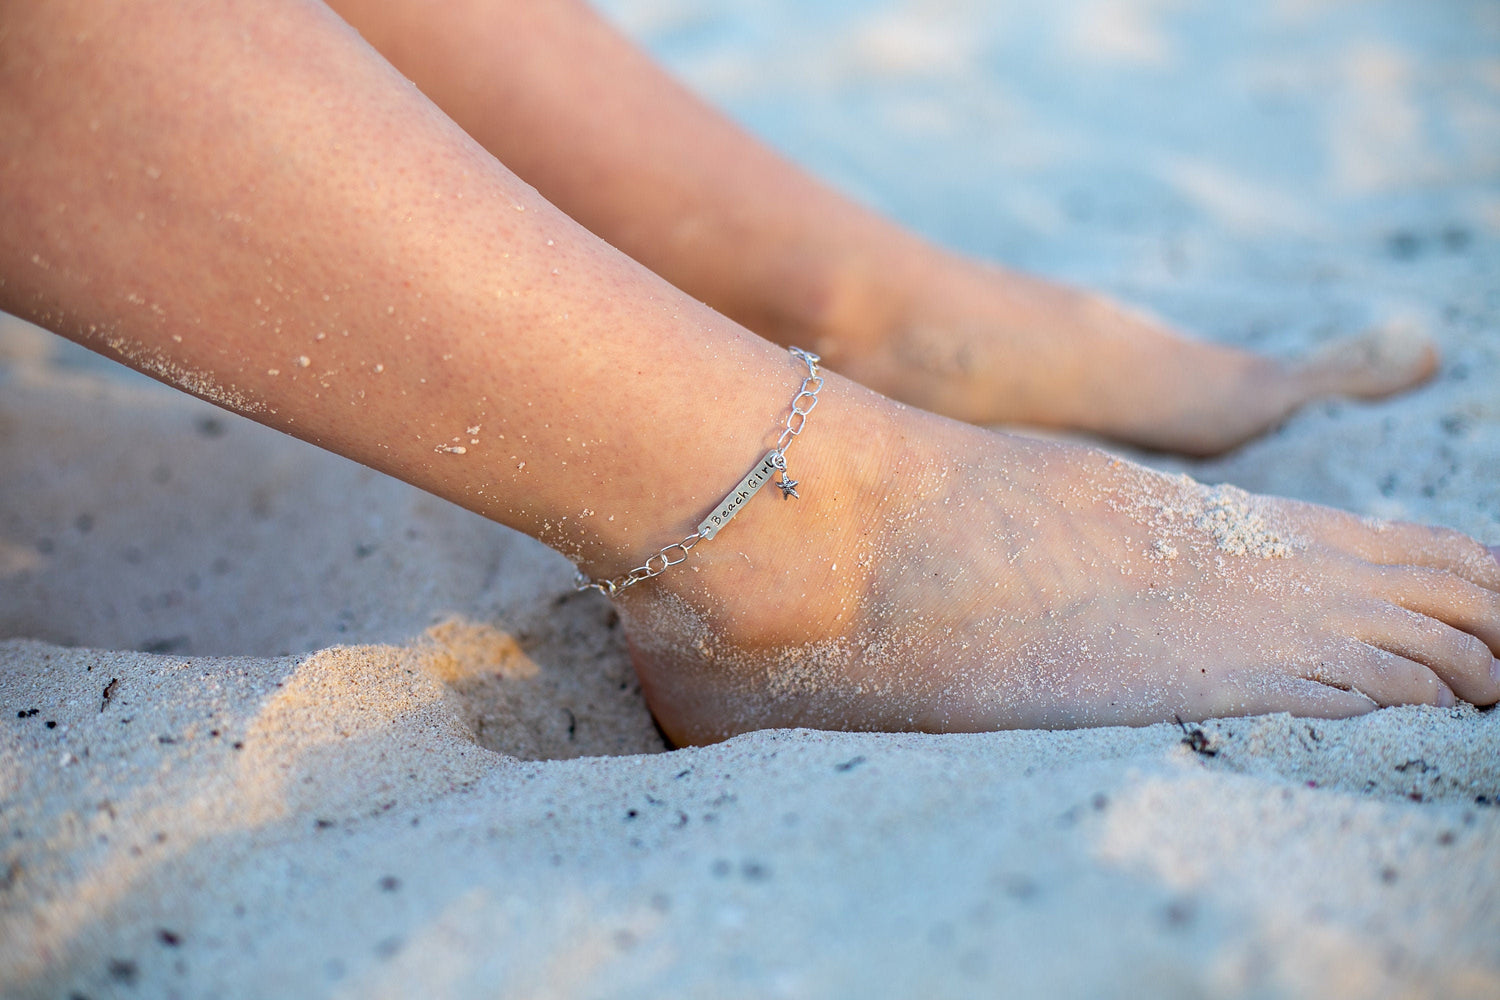 Beach Girl Starfish Anklet, Sterling Silver Starfish Anklet, Starfish Ankle Bracelet, Bridesmaid gift, Beach Wedding, Gifts for Her